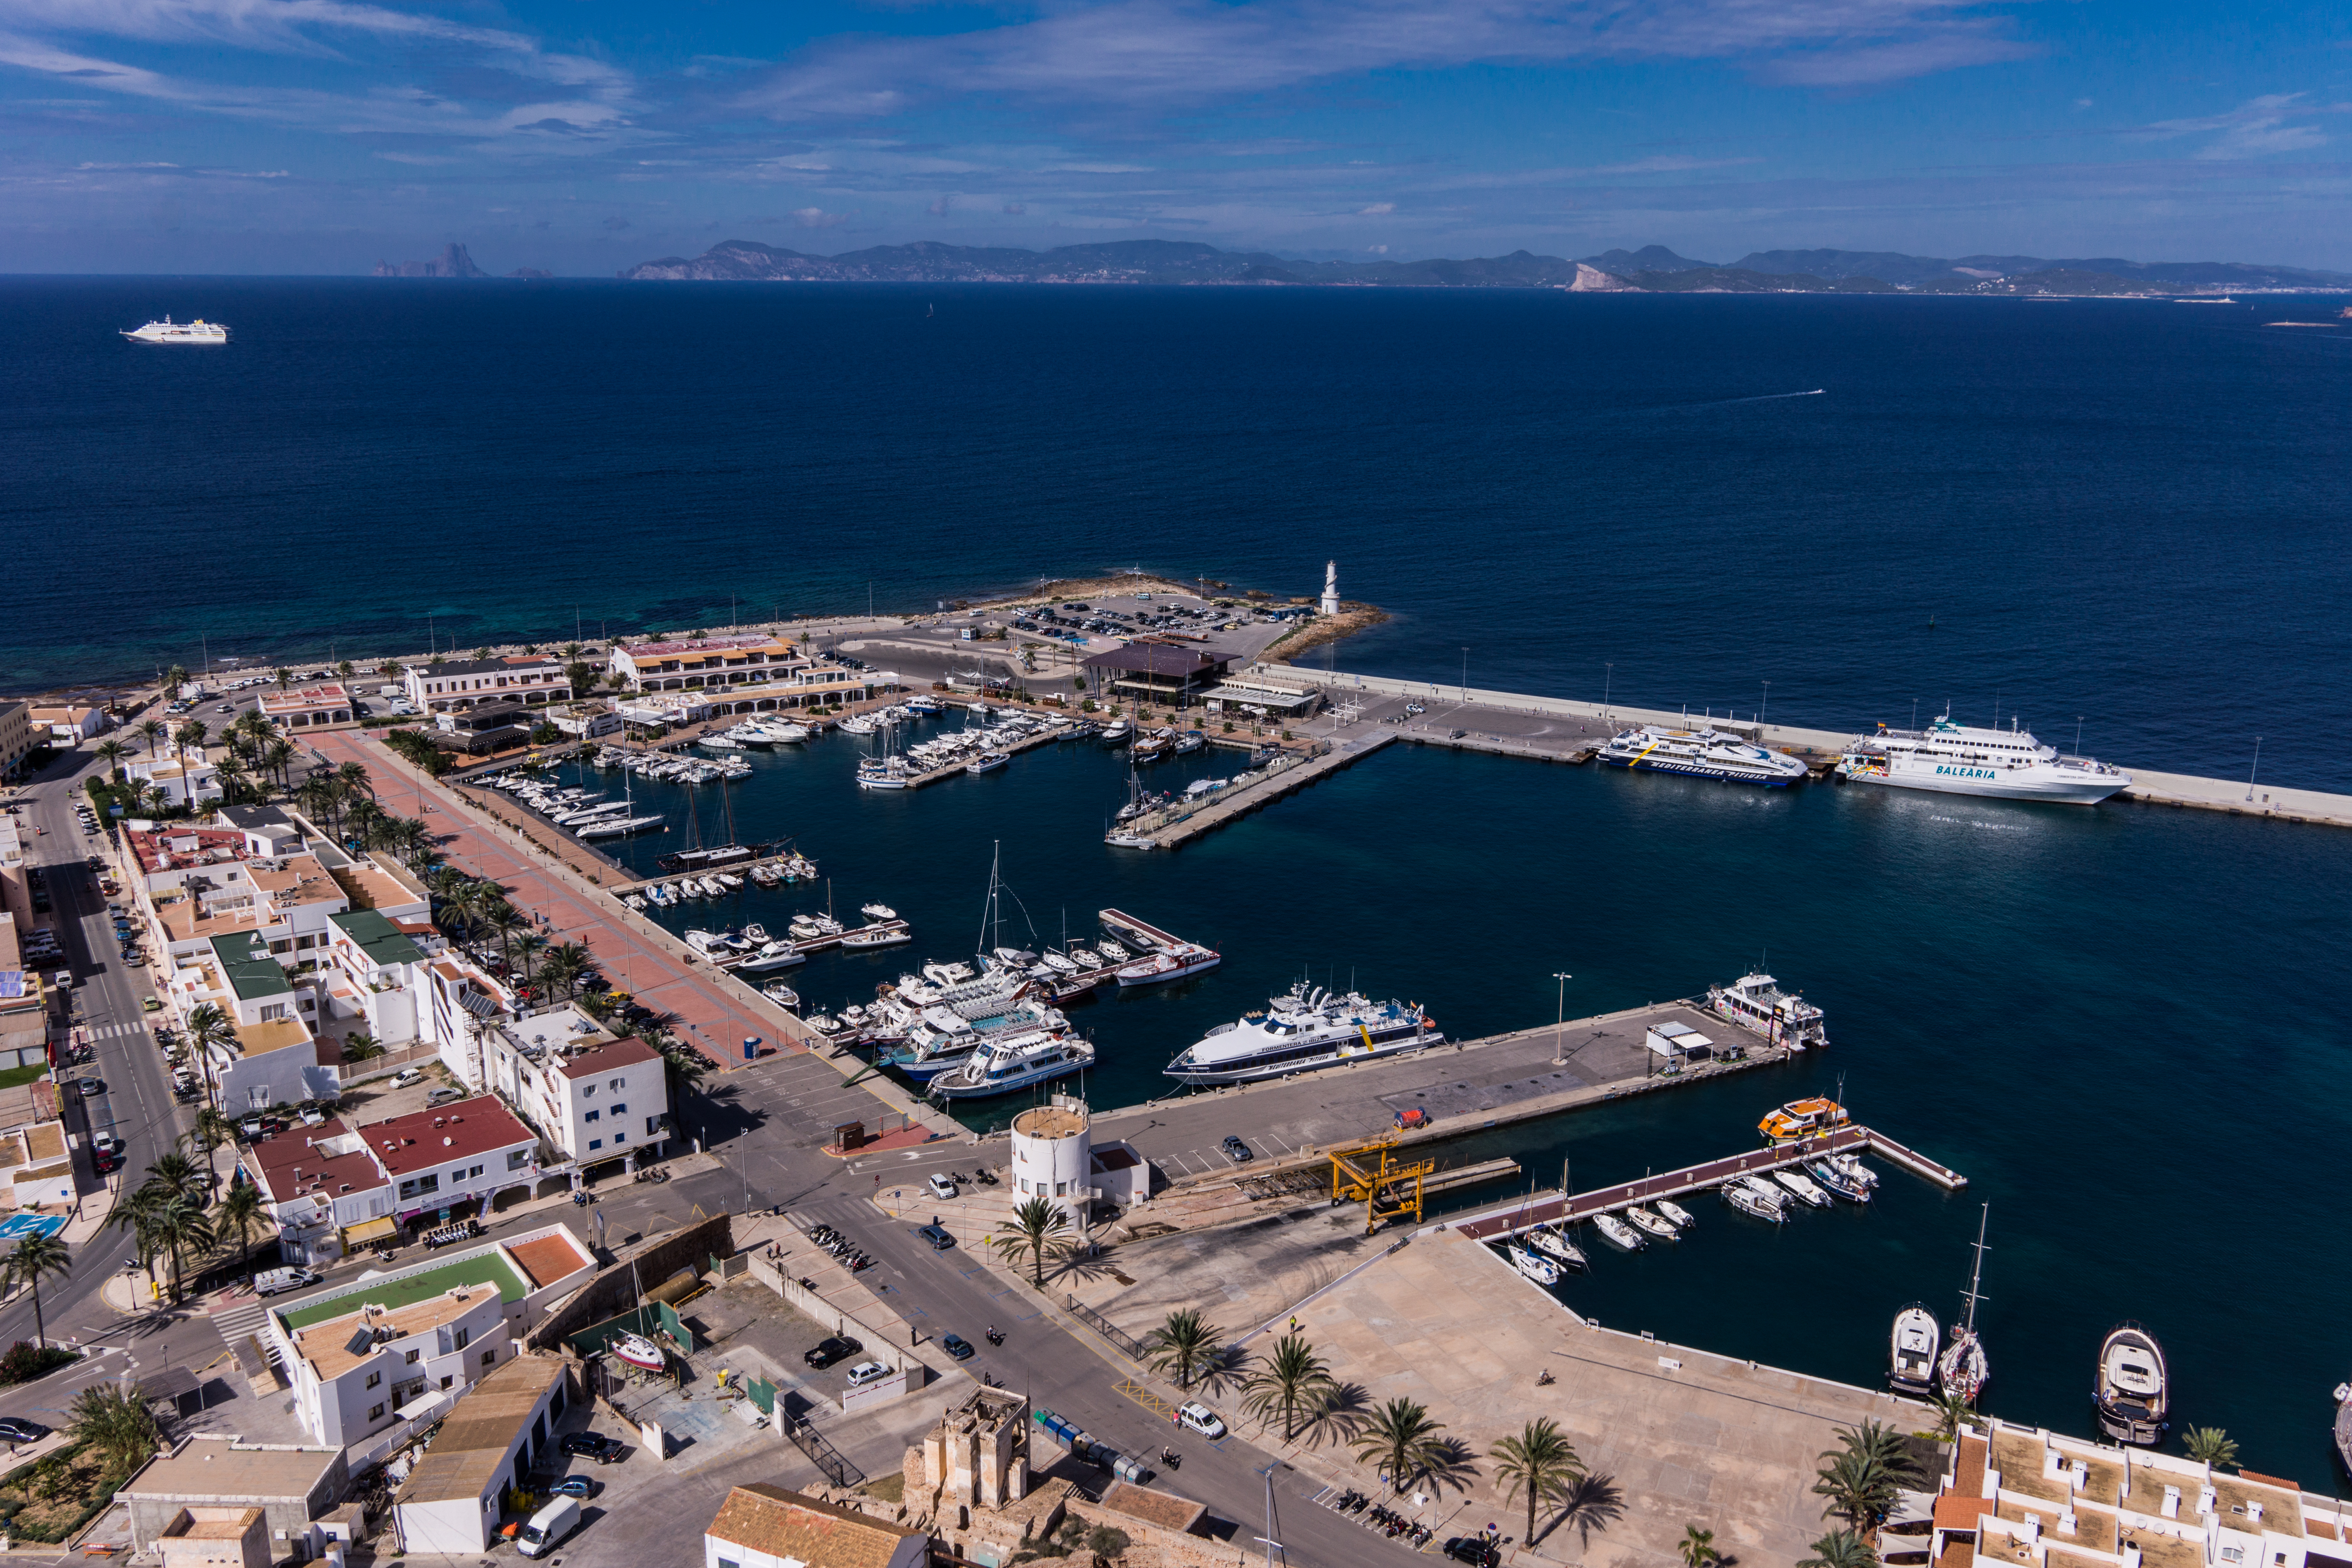 The invitation to tender is issued for the fuel supply facilities in the port of La Savina